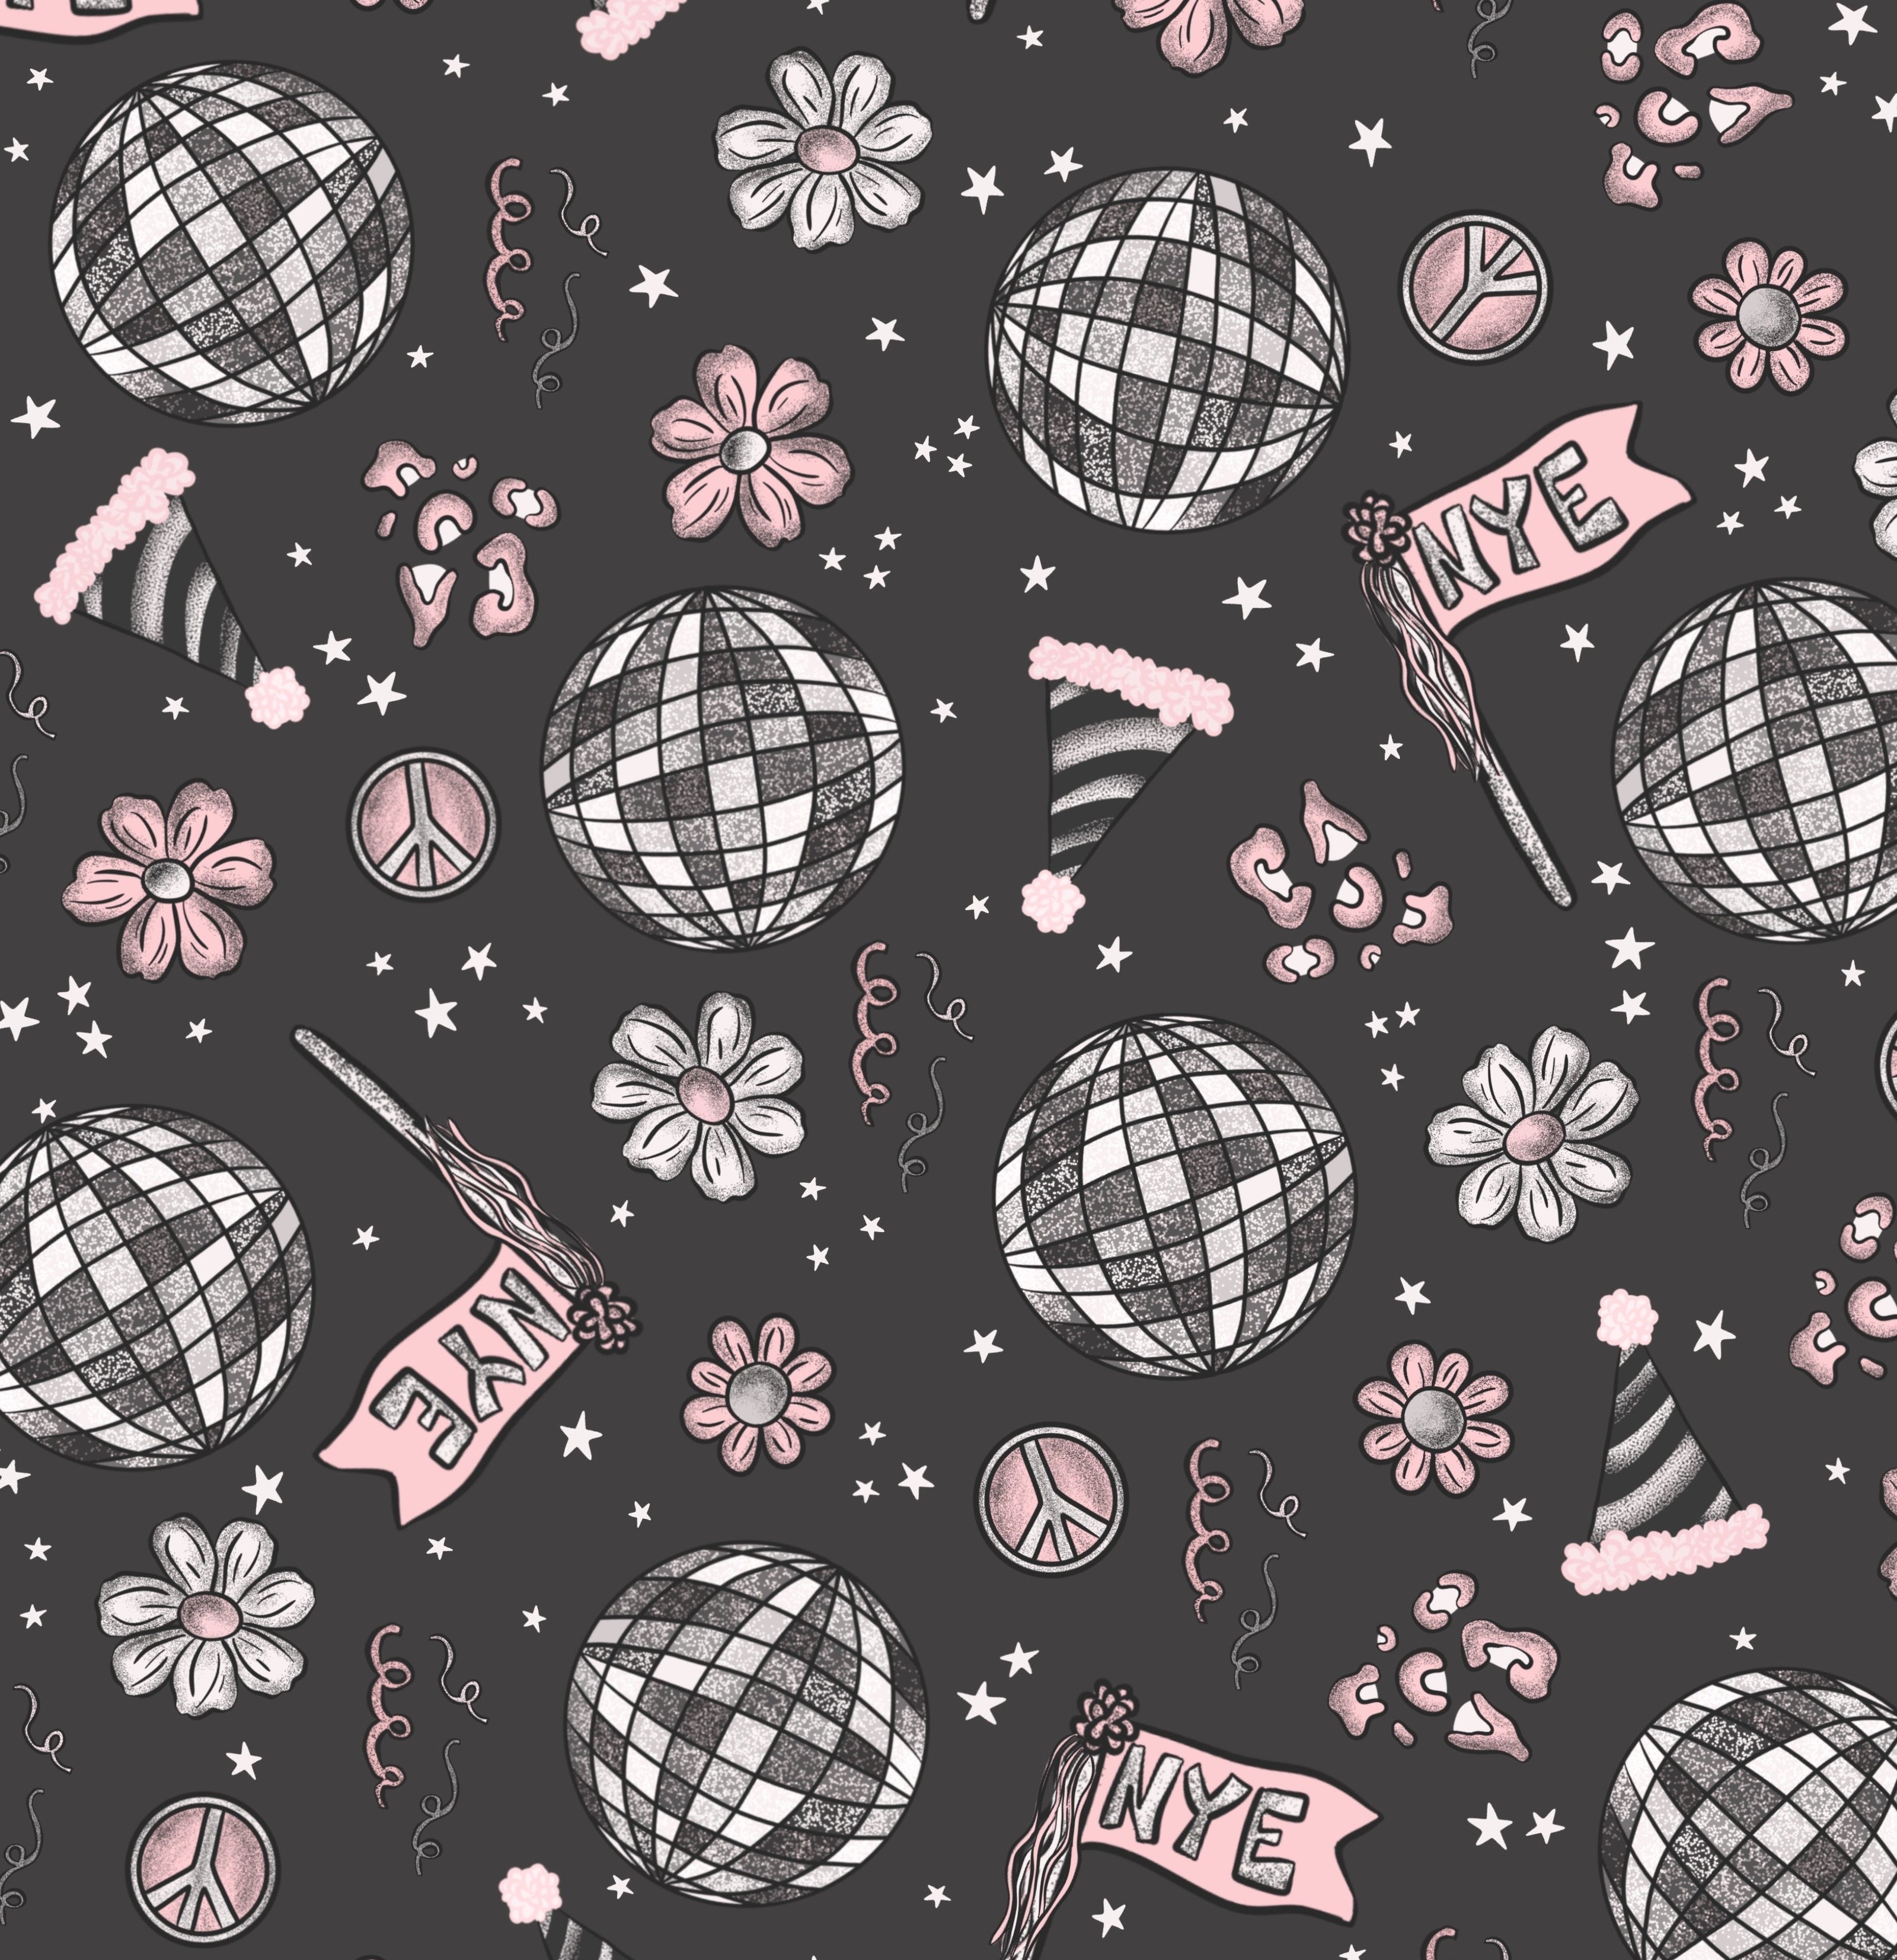 New years eve theme seamless surface pattern design collection digital download